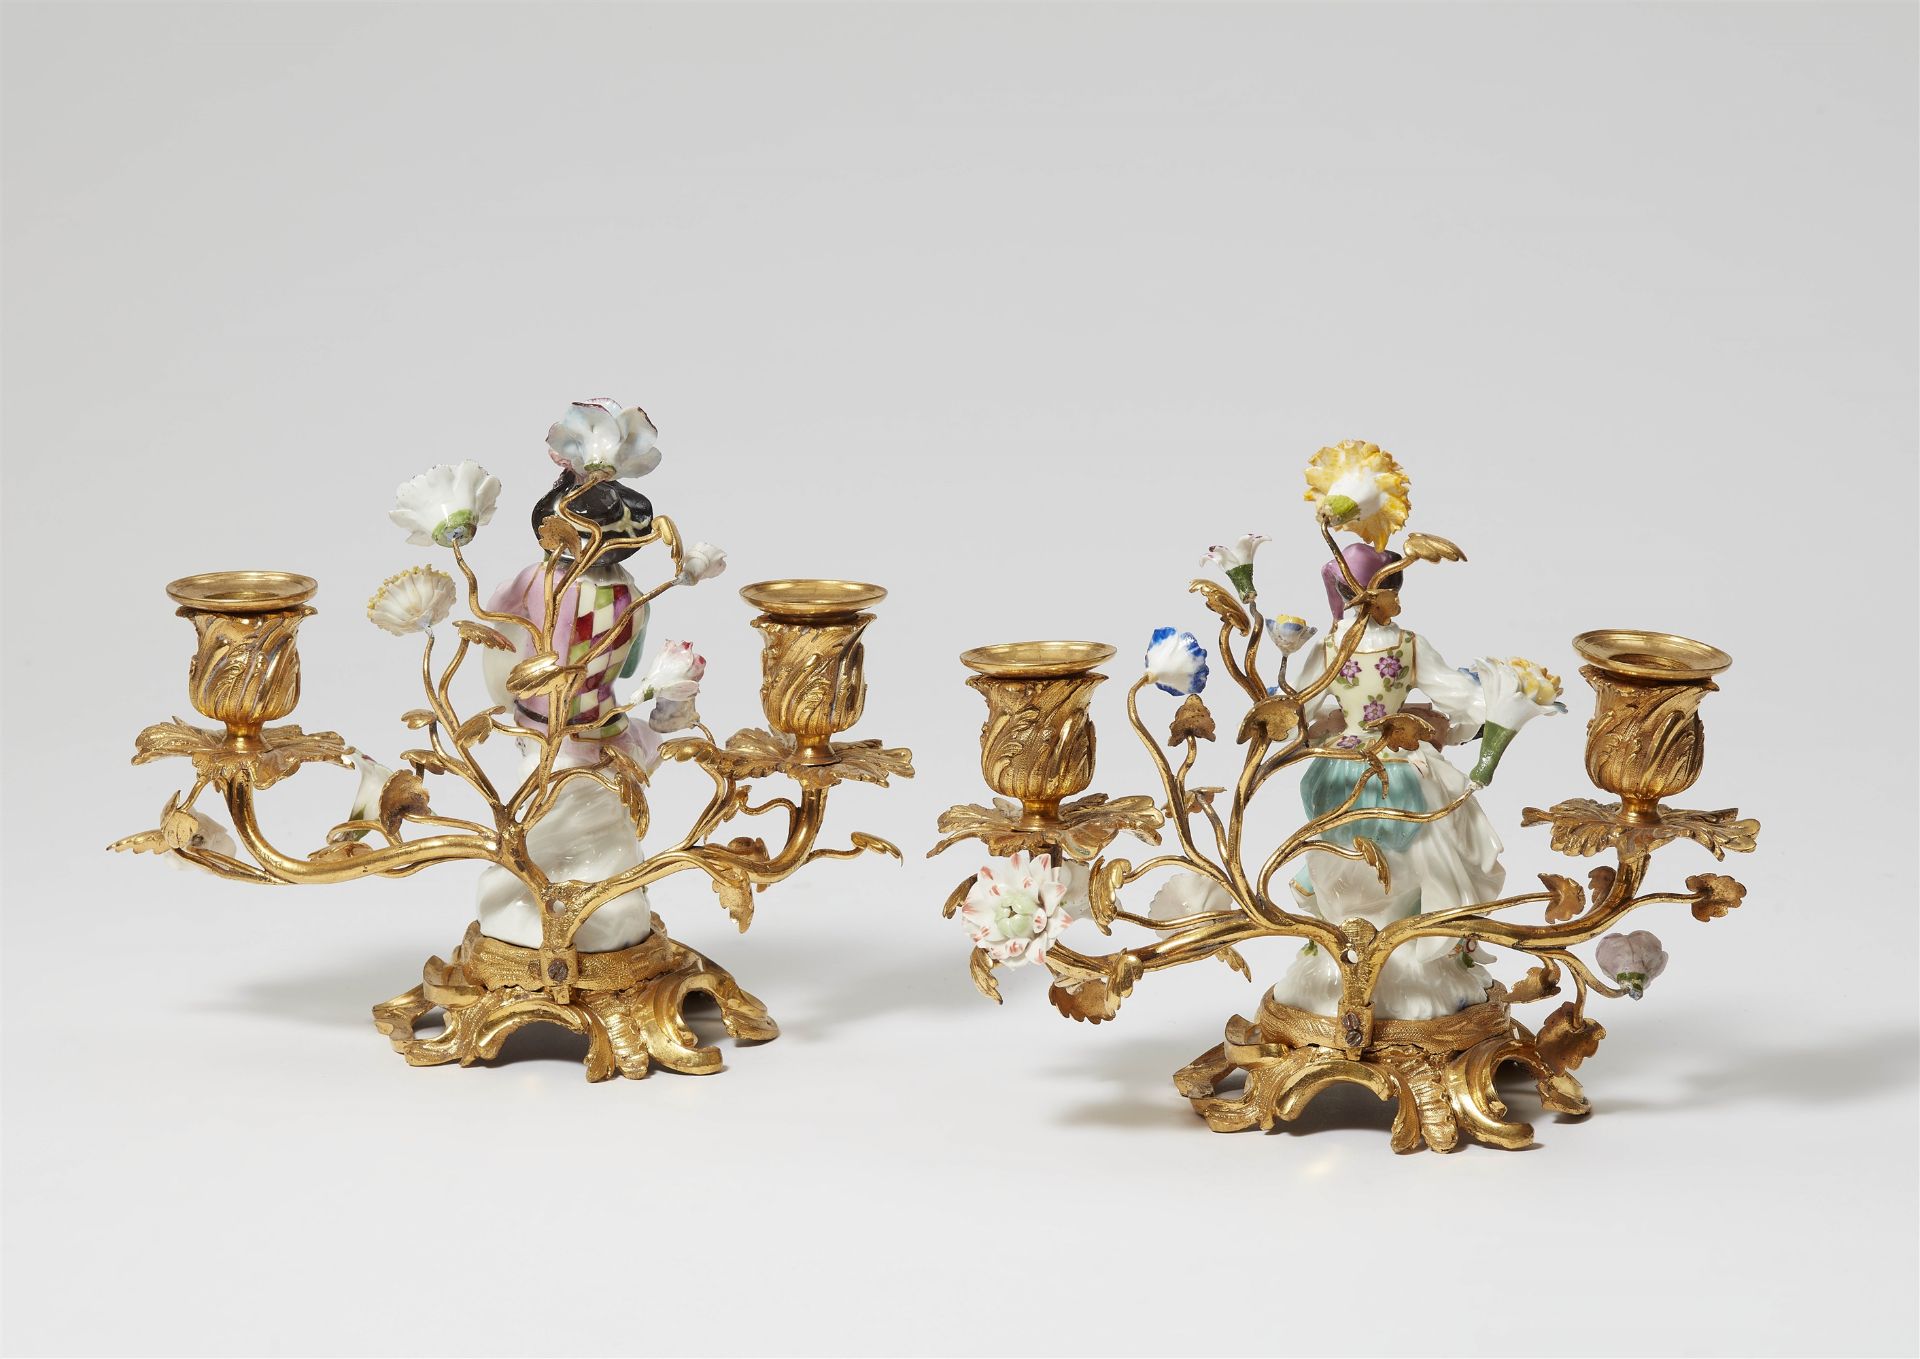 A pair of candlesticks with Meissen porcelain figures - Image 2 of 4